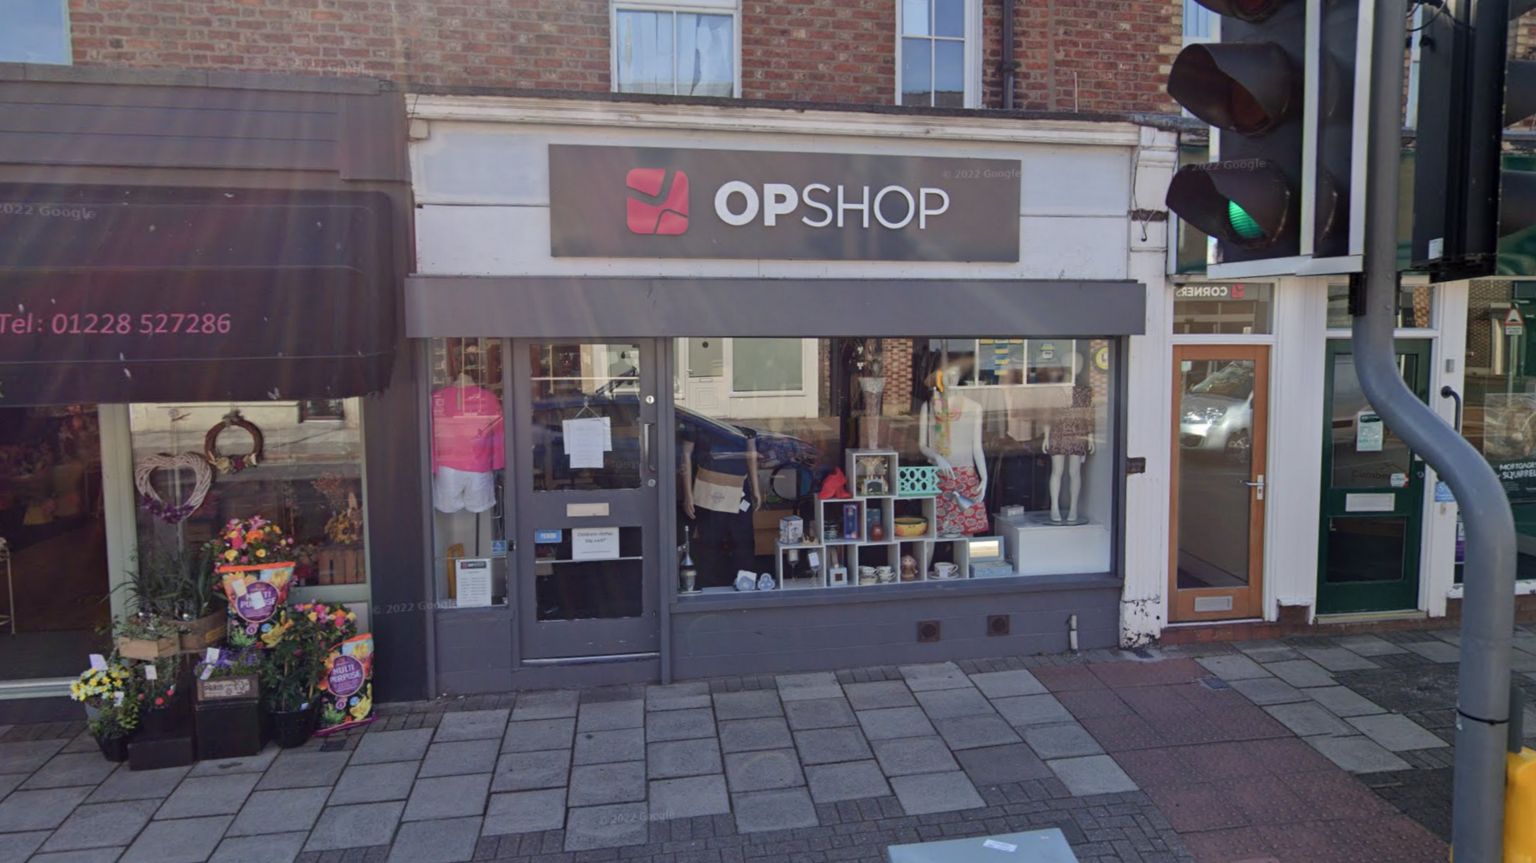 An exterior view of the OpShop charity shop. The shop on the high street has a grey, pink and white sign with clothes and bric-and-brac displayed in the window. There is a florist to the left.